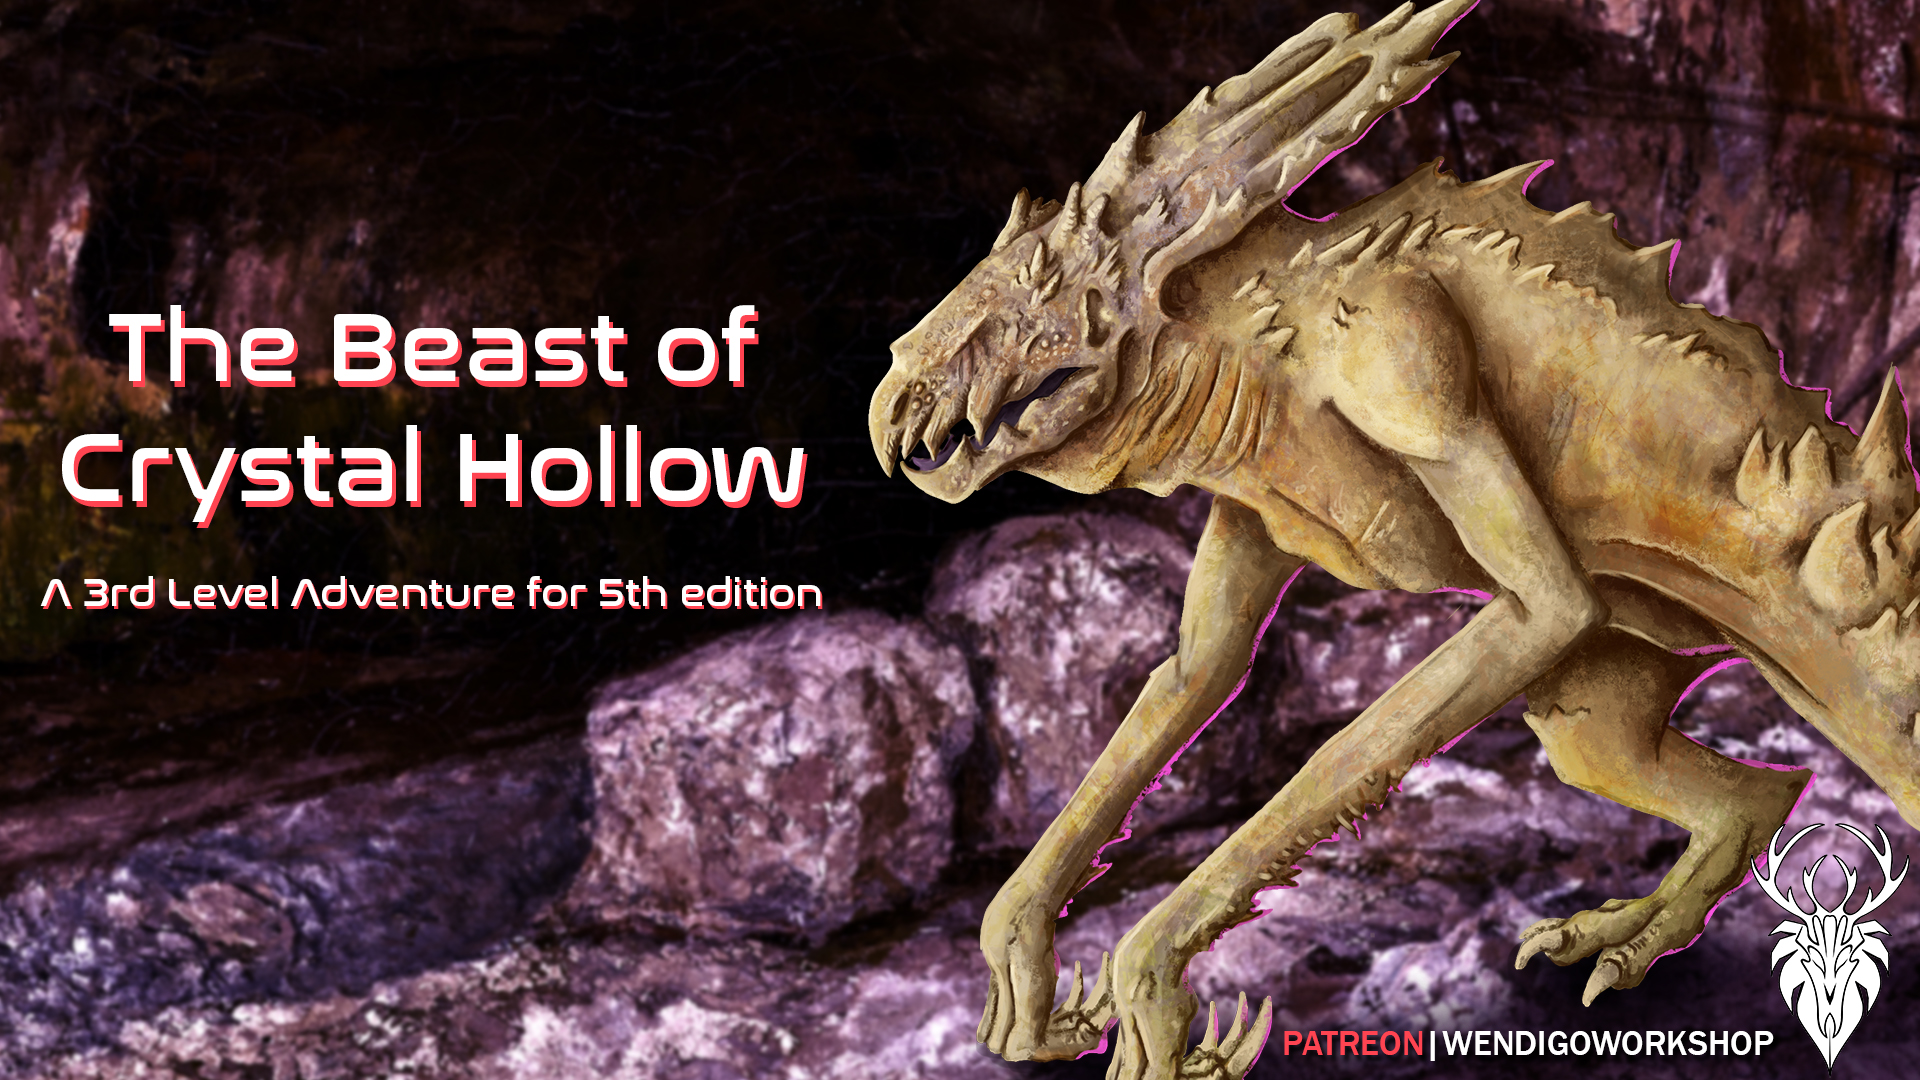 The Beast of Crystal Hollow